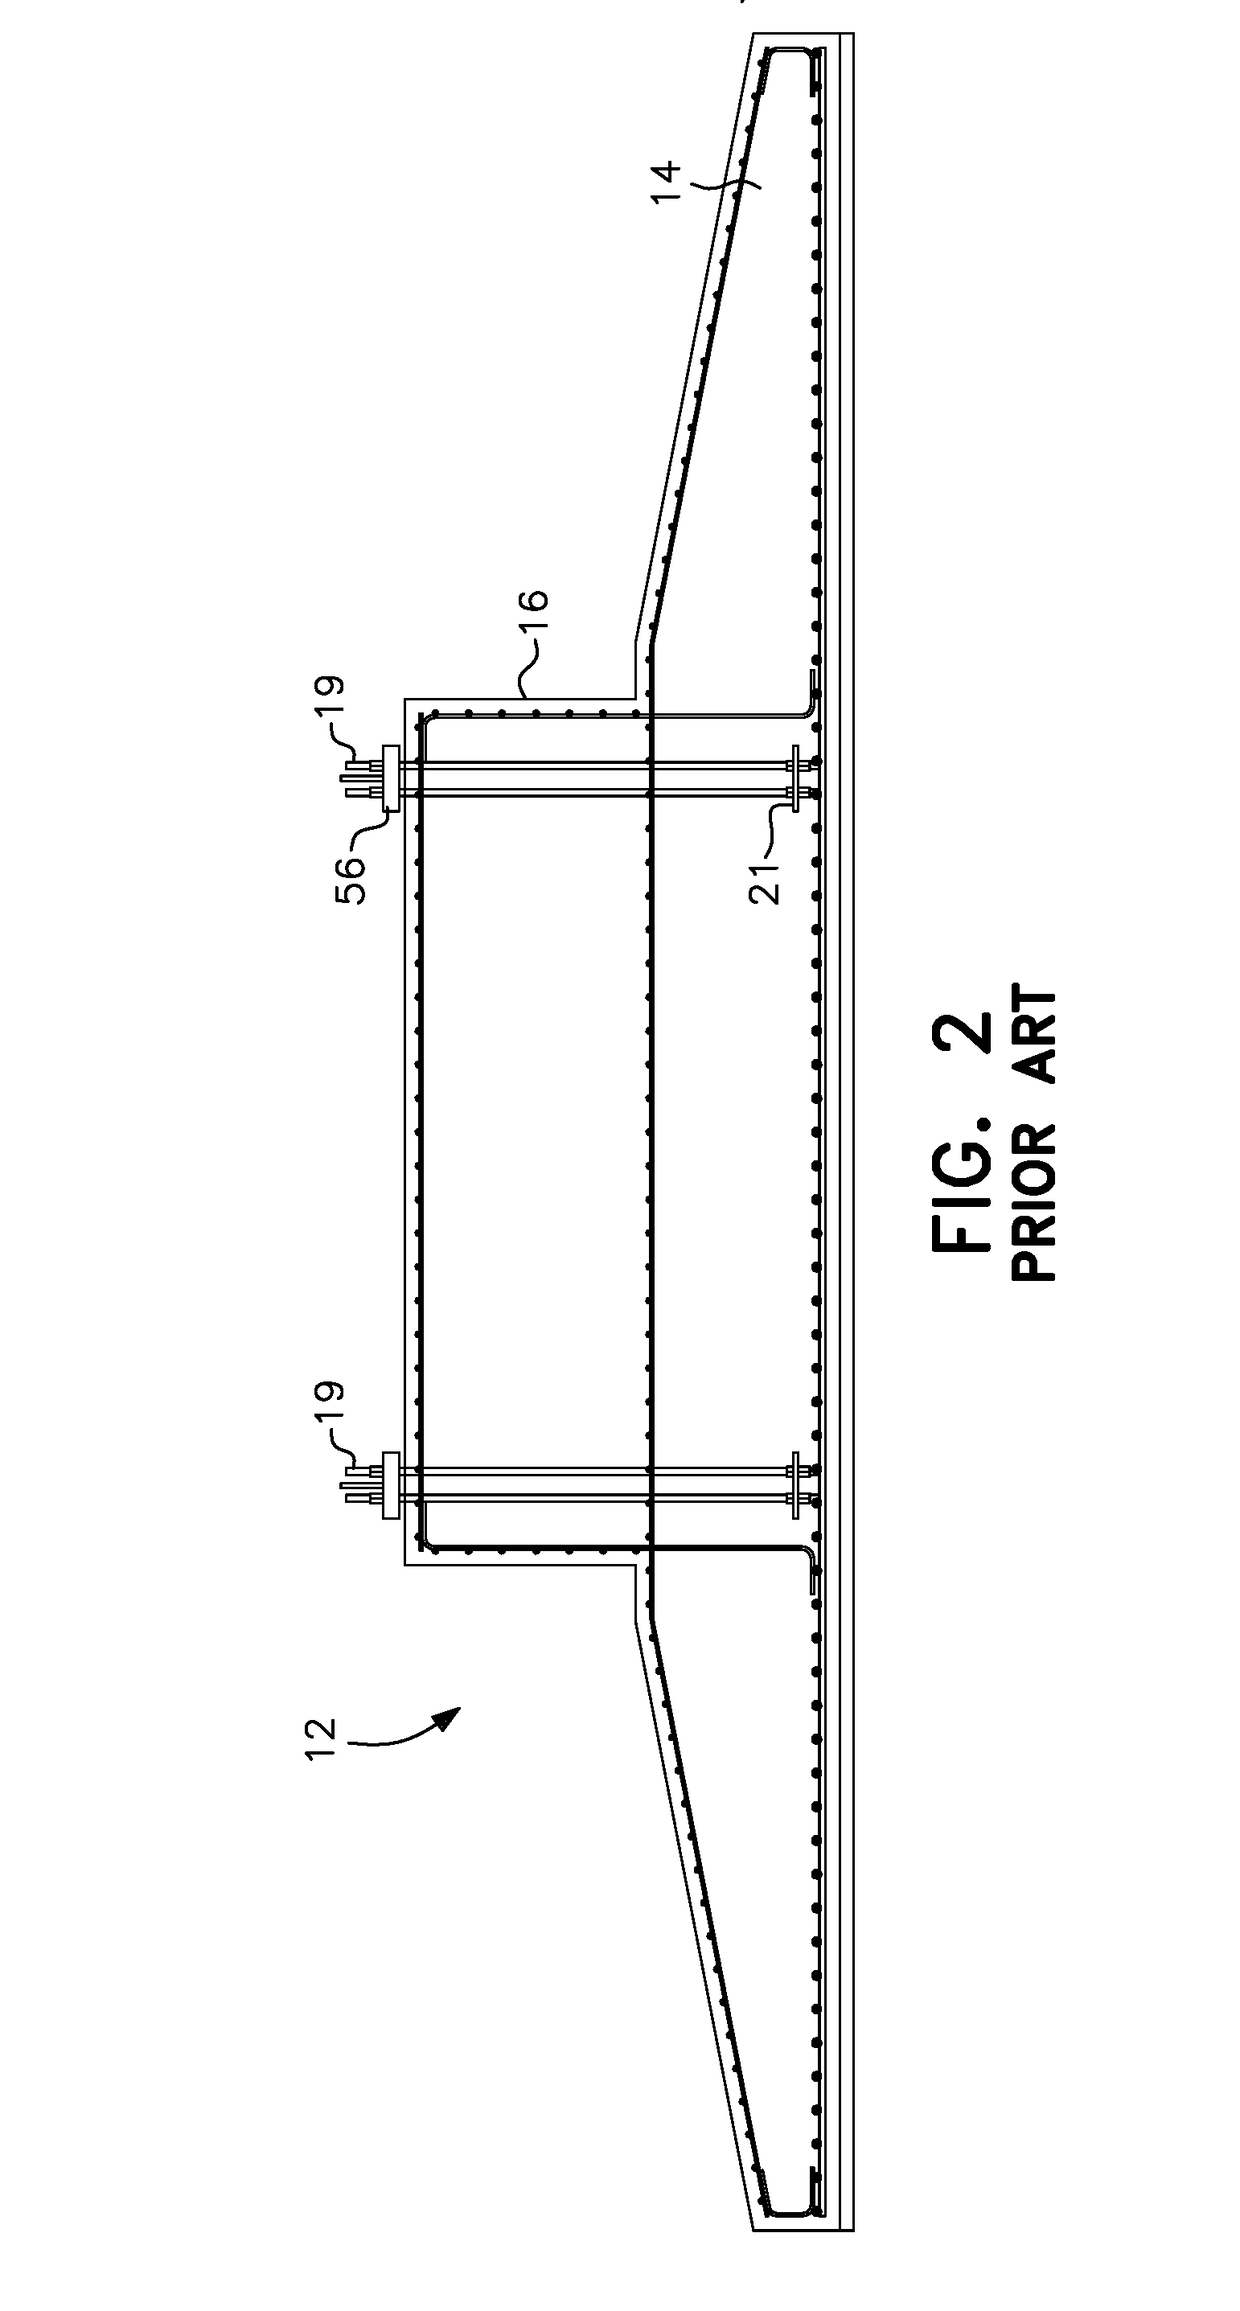 Retrofit reinforcing structure addition and method for wind turbine concrete gravity spread foundations and the like